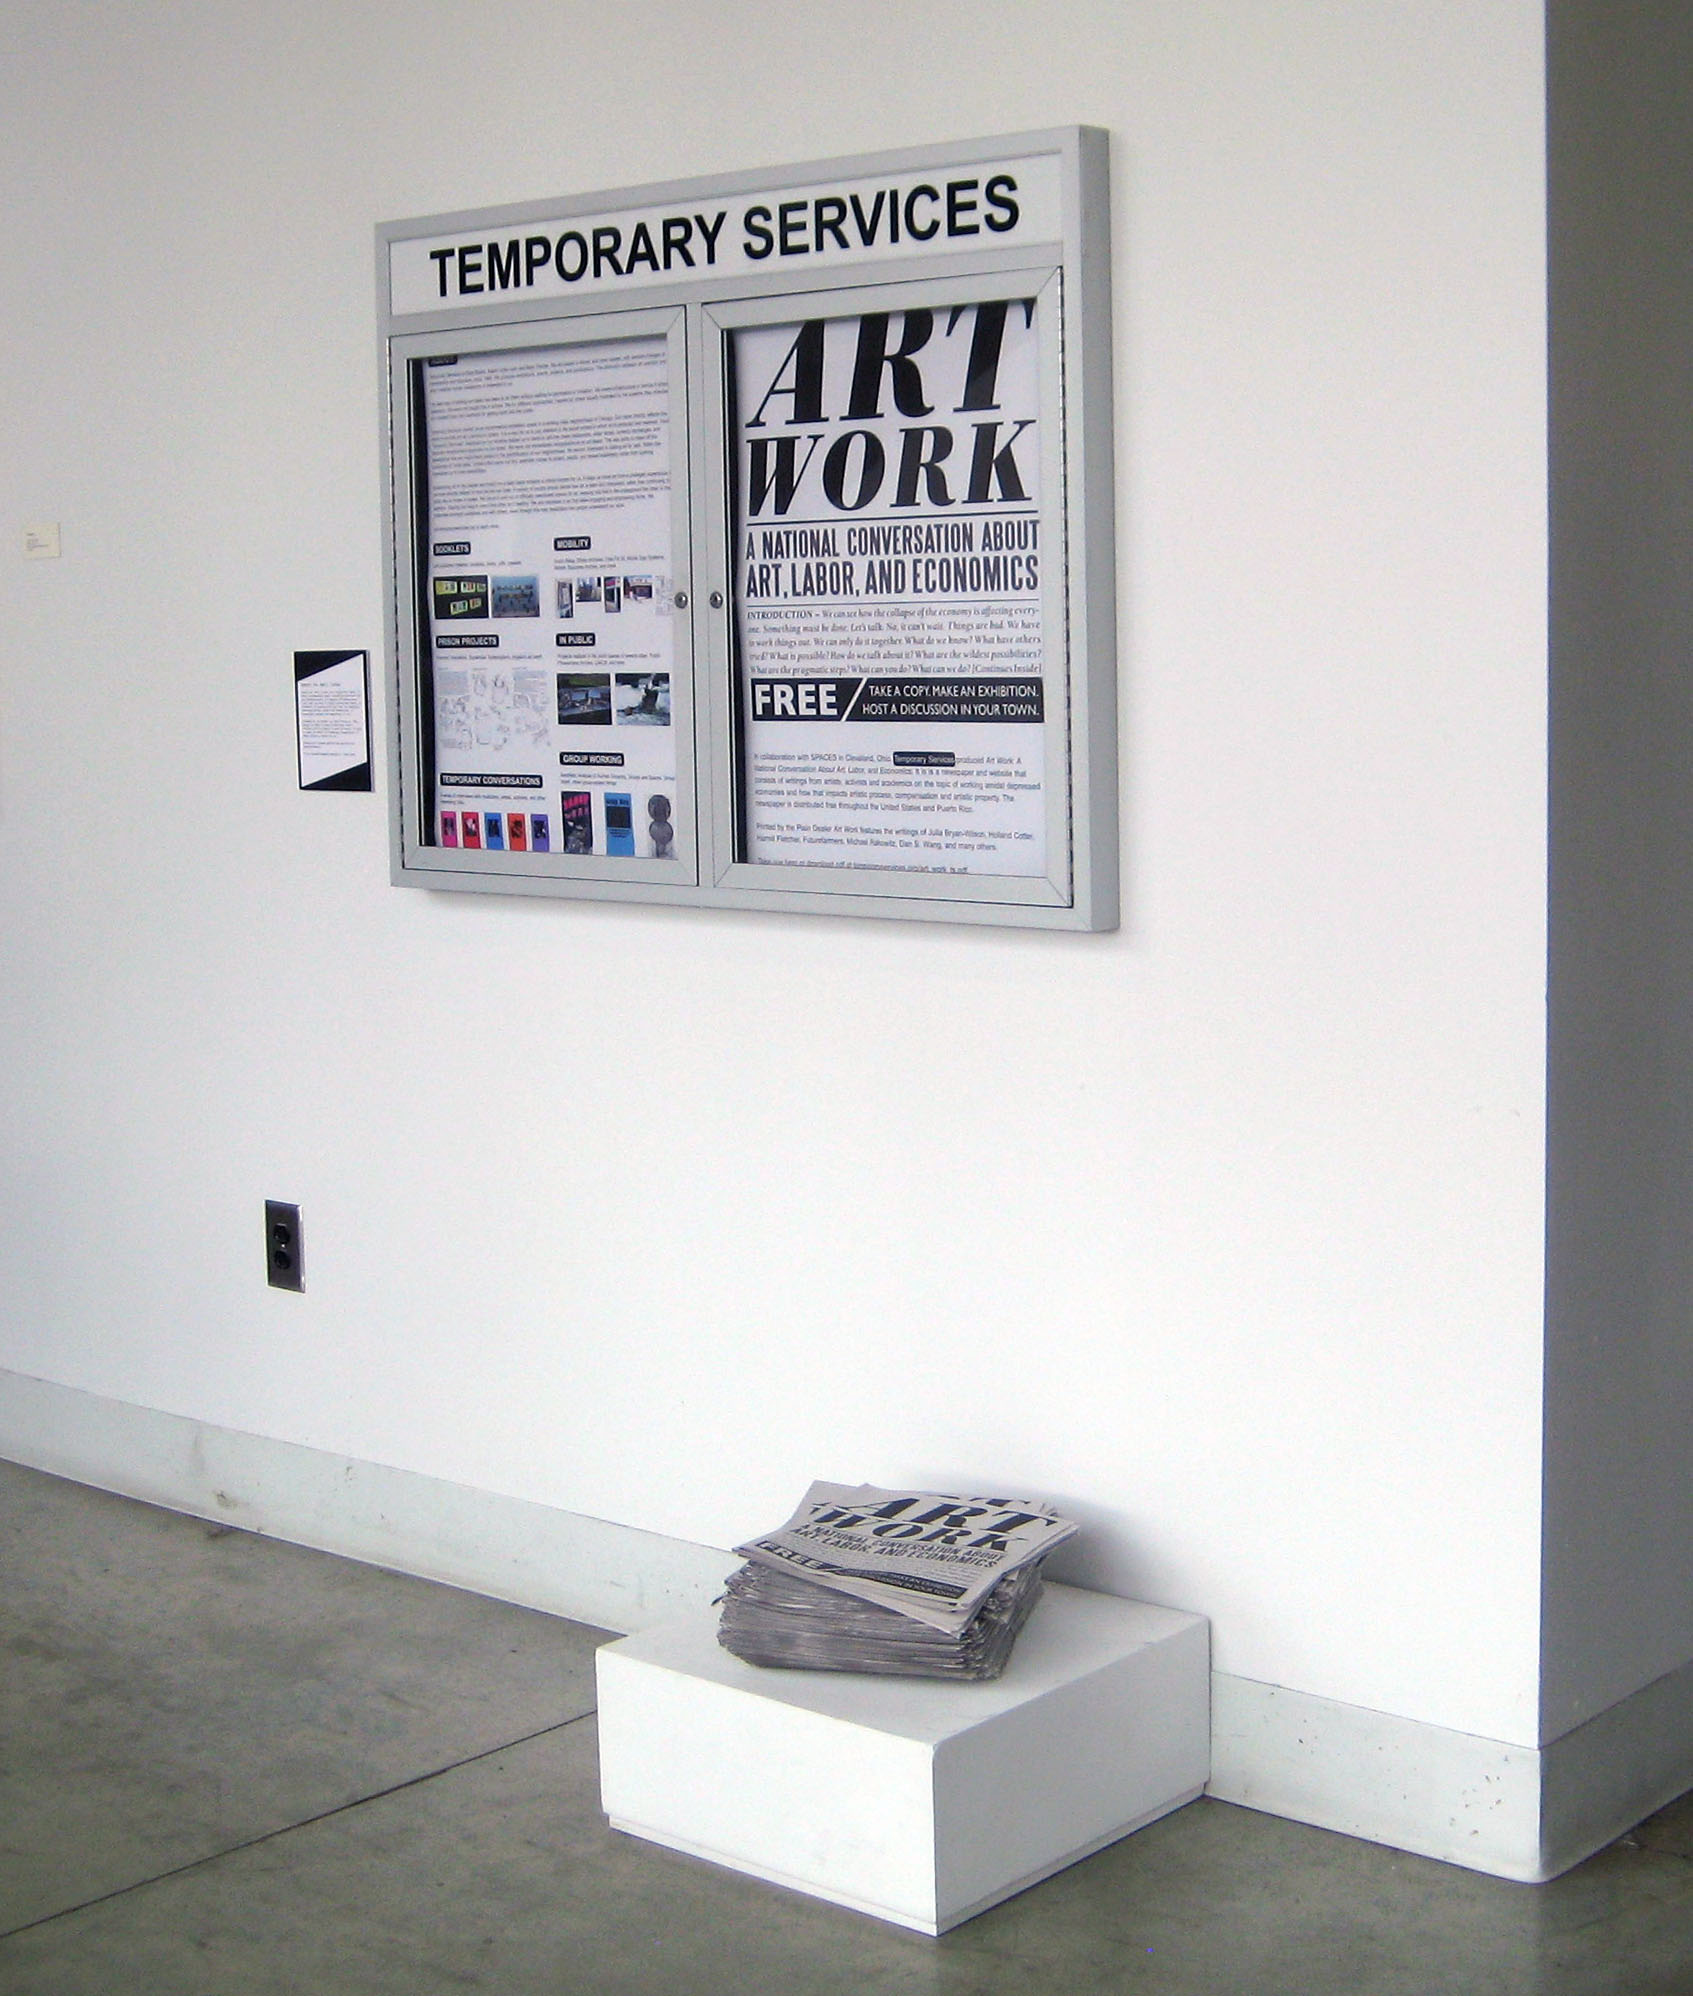  Temporary Services,&nbsp; Art Work: A National Conversation About Art, Labor, and Economics , 32-page newspaper and conversation series. 